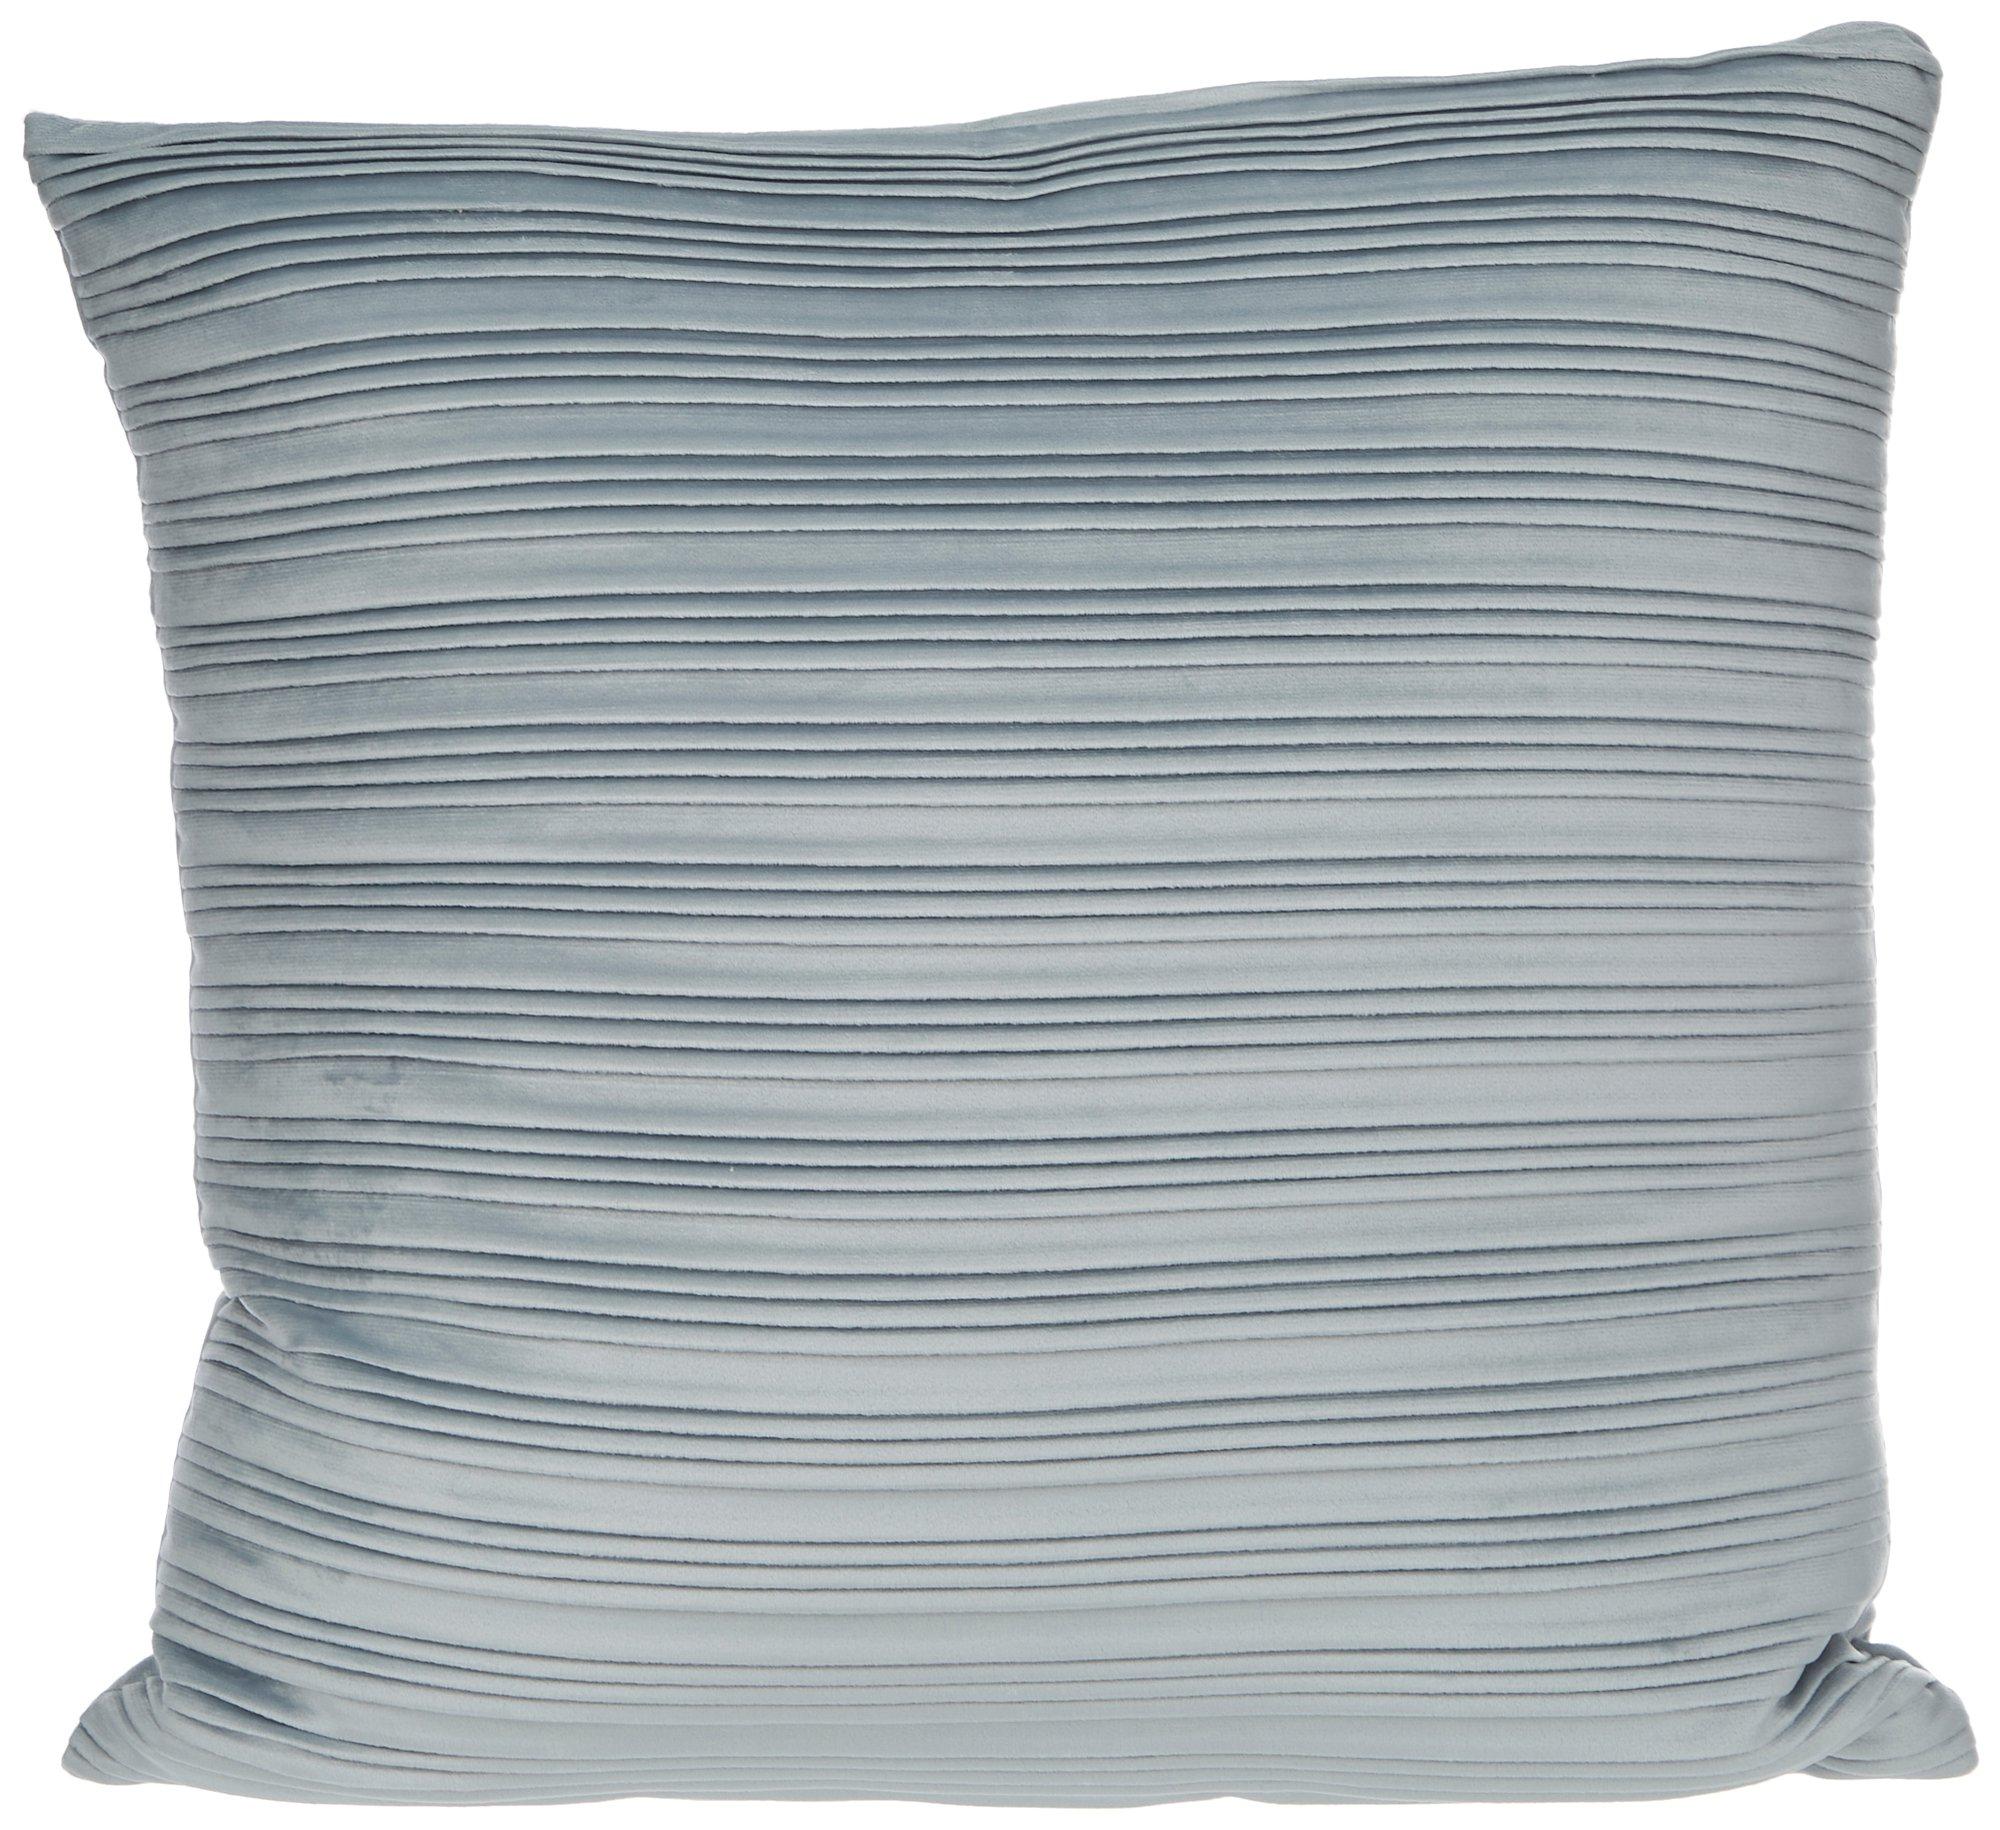 Waverly 18x18 Solid Pleated Velvet Decorative Pillow